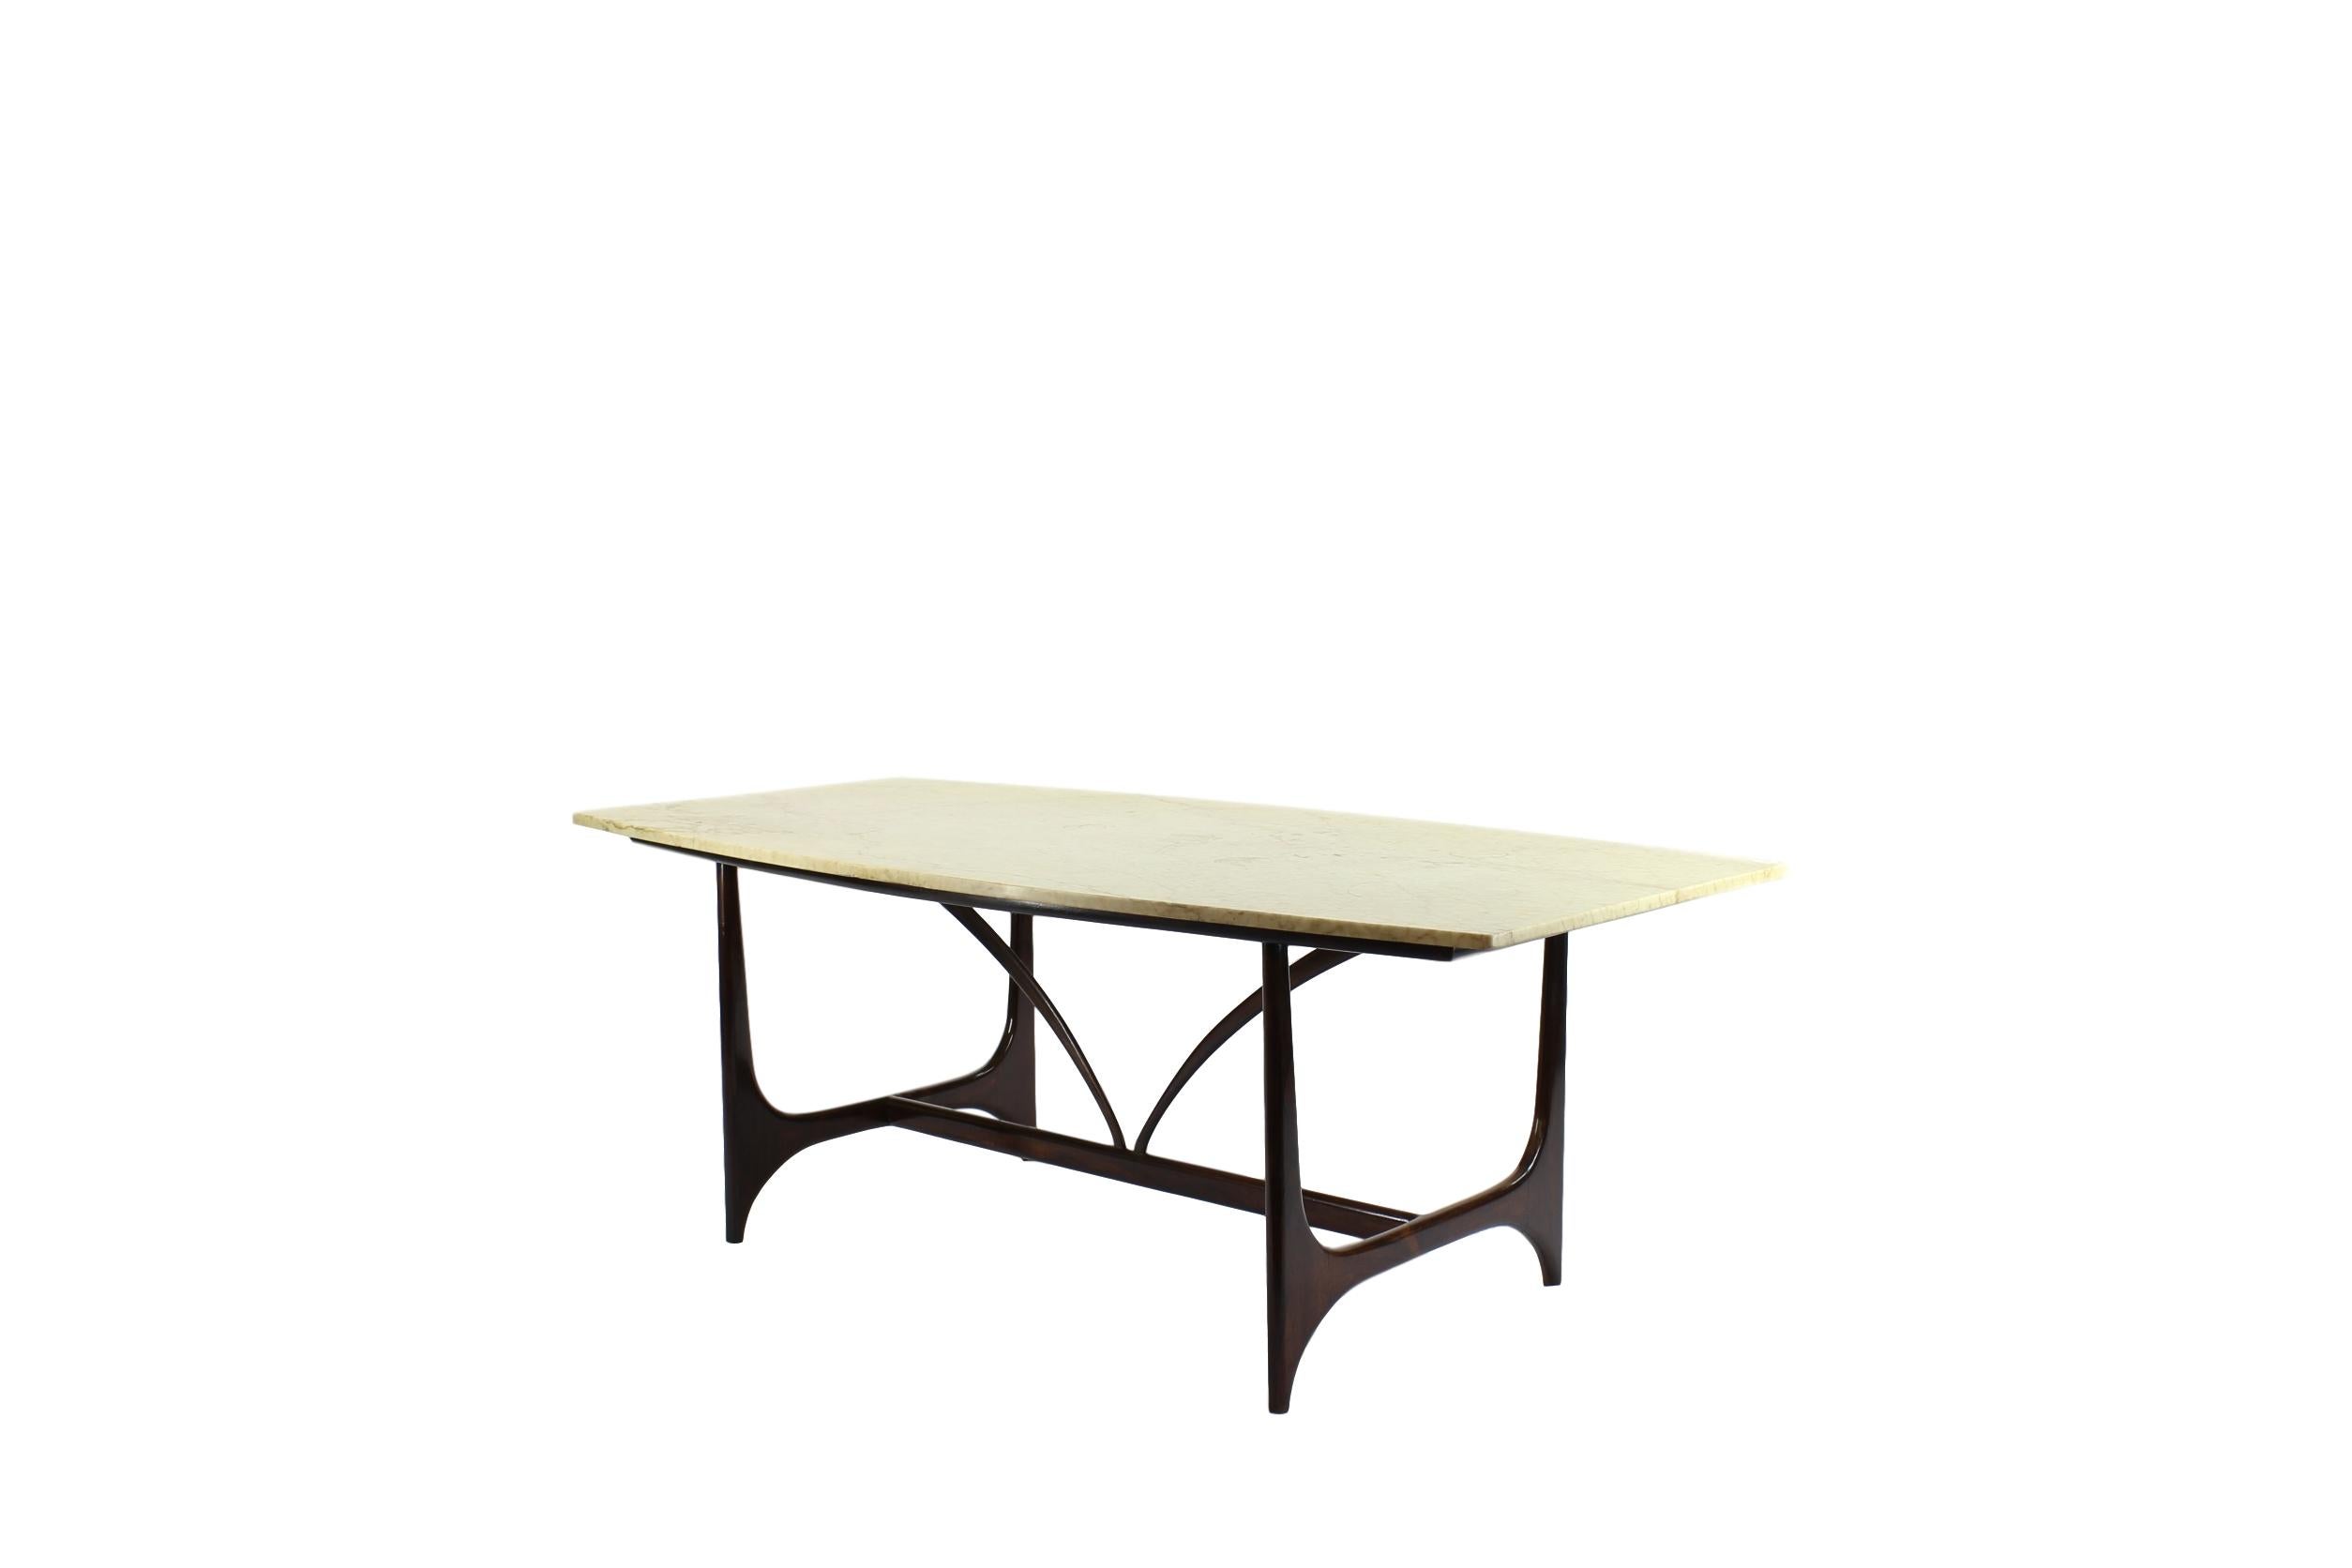 Spectacular dining table in rosewood and marble on top designed as a tribute of Brasilia shapes.

Referred to often as the “father” of Brazilian modernism, furniture designer Joaquim Tenreiro, who was born in Portugal and moved to Rio de Janeiro in